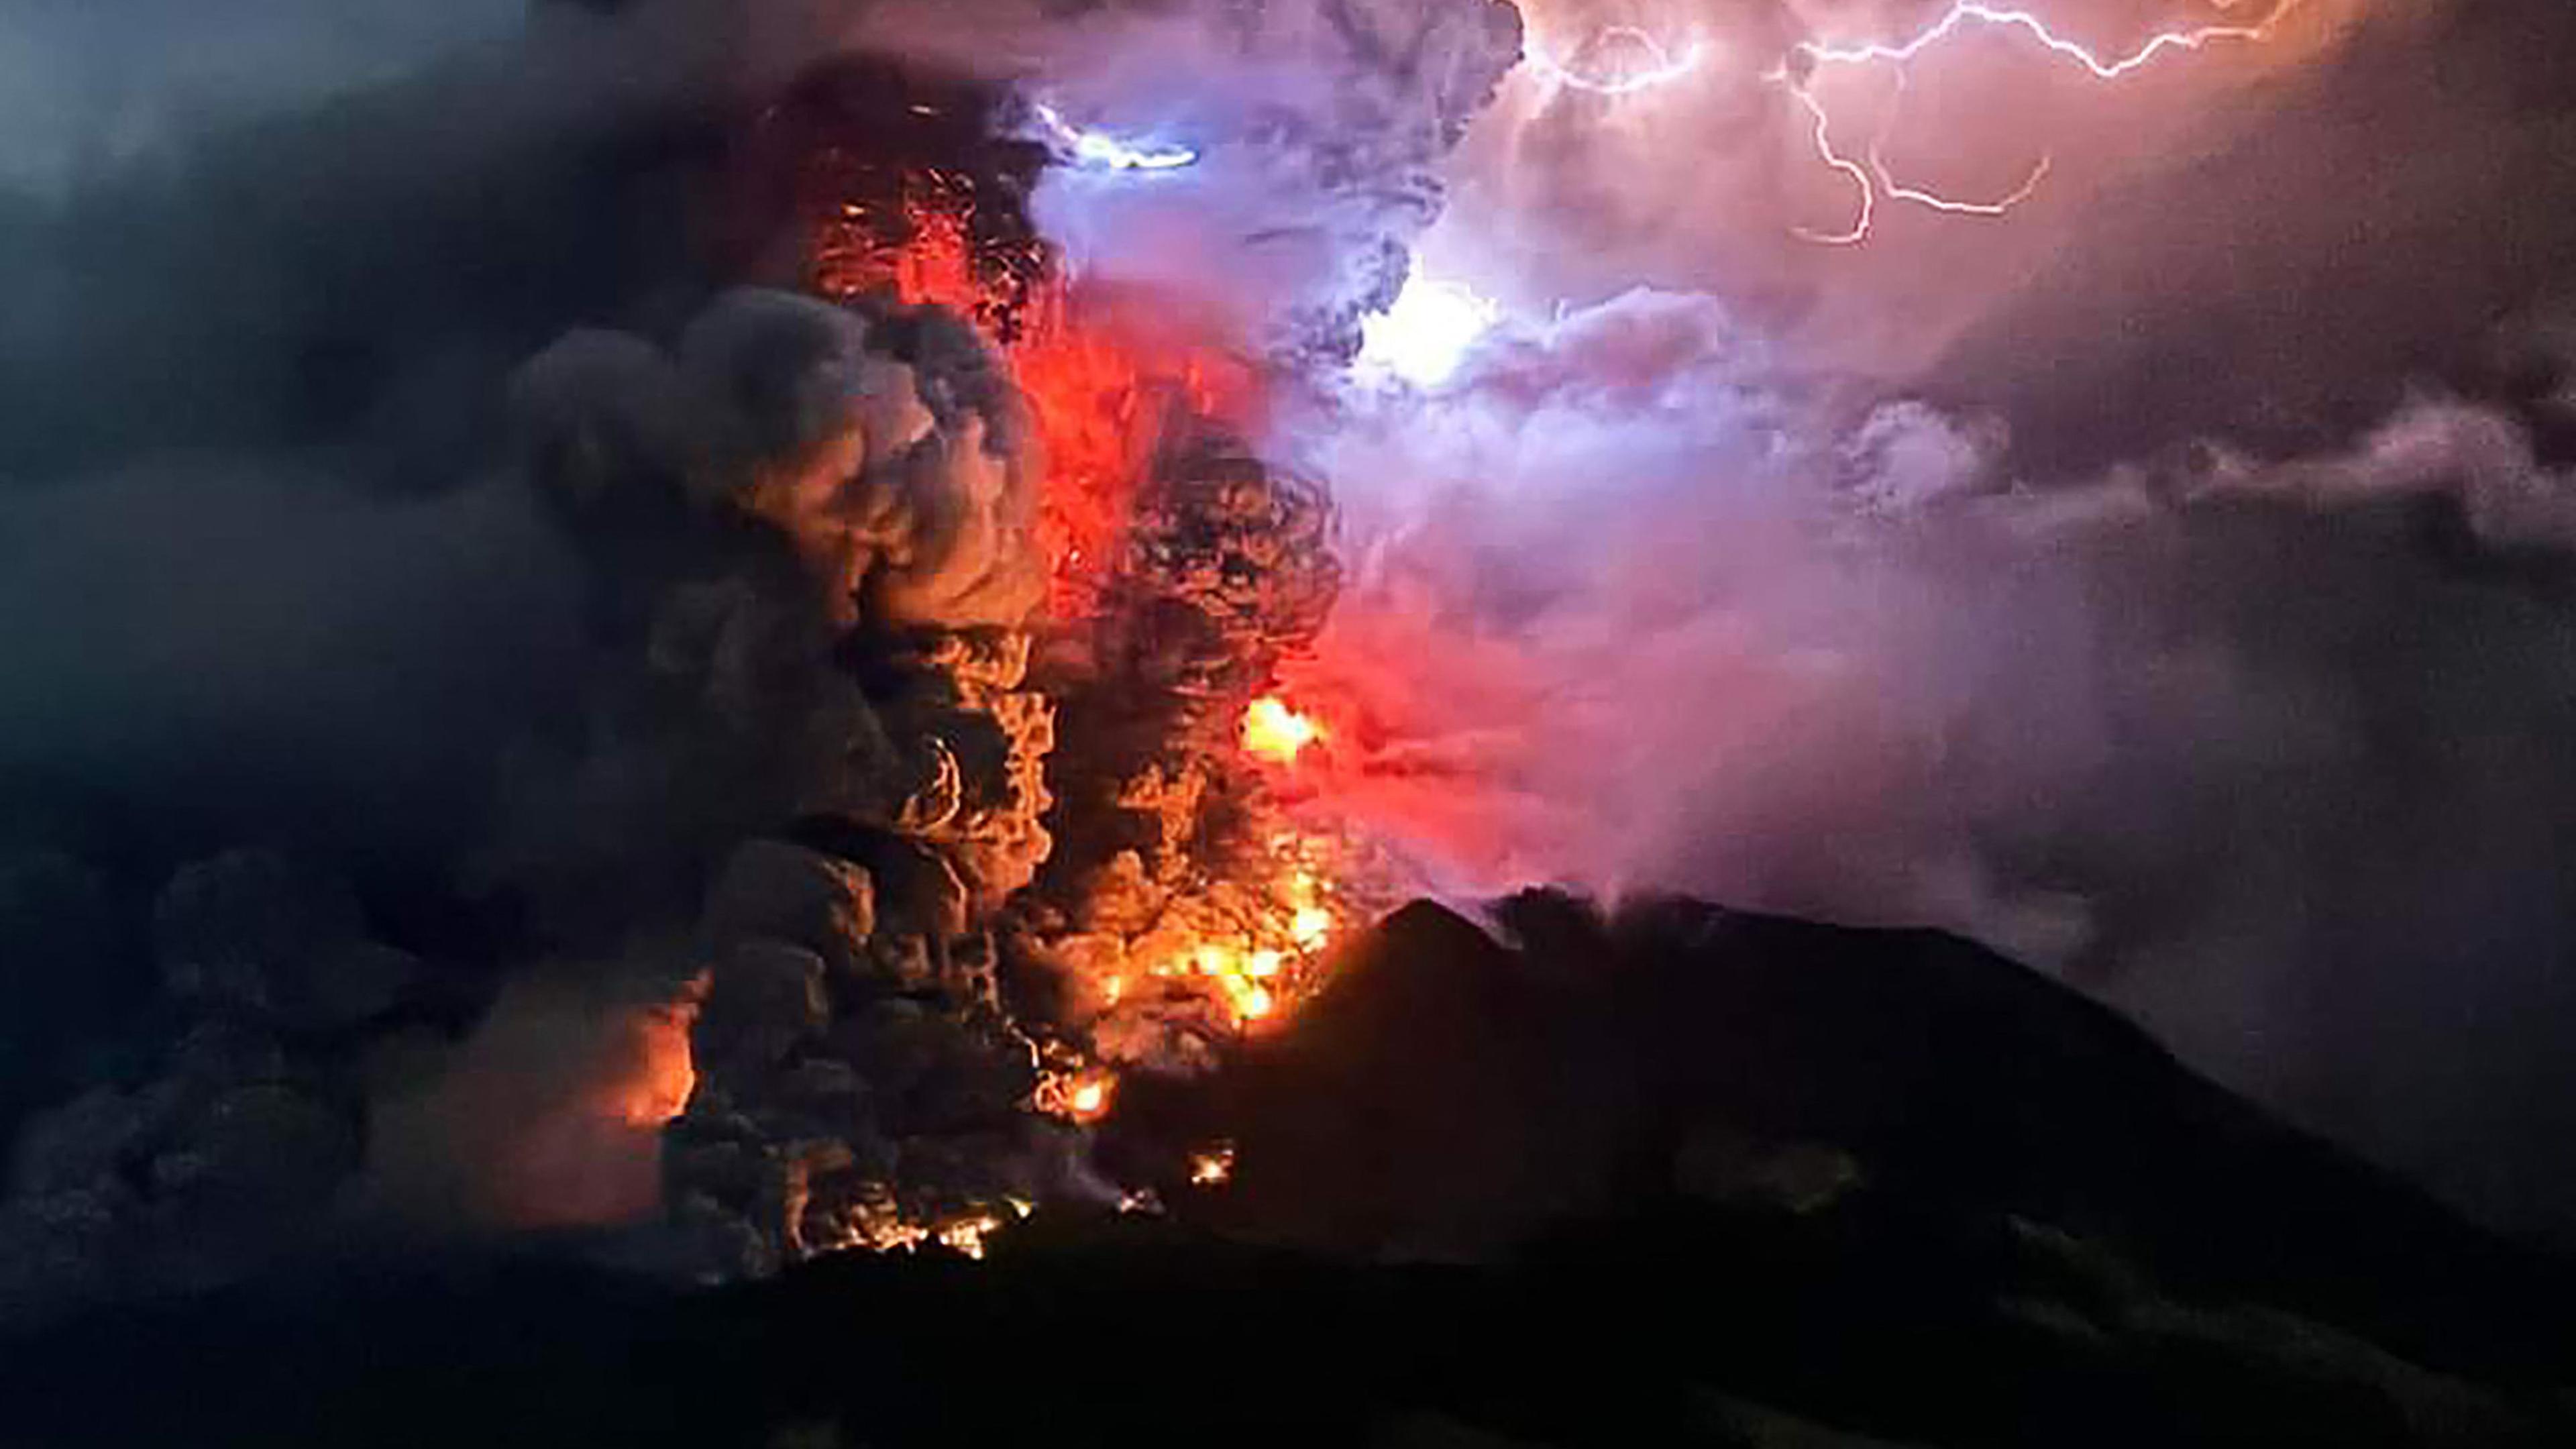 TOPSHOT - This handout photograph taken and released by the Center for Volcanology and Geological Hazard Mitigation on April 17, 2024, shows Mount Ruang spewing hot lava and smoke as seen from Sitaro, North Sulawesi. A volcano erupted several times in Indonesia's outermost region overnight on April 17, forcing hundreds of people to be evacuated after it spewed lava and a column of smoke more than a mile into the sky. (Photo by Handout / Center for Volcanology and Geological Hazard Mitigation / AFP) / RESTRICTED TO EDITORIAL USE - MANDATORY CREDIT AFP PHOTO / CENTER FOR VOLCANOLOGY AND GEOLOGICAL HAZARD MITIGATION/ PVMBK - NO MARKETING - NO ADVERTISING CAMPAIGNS- DISTRIBUTED AS A SERVICE TO CLIENTS